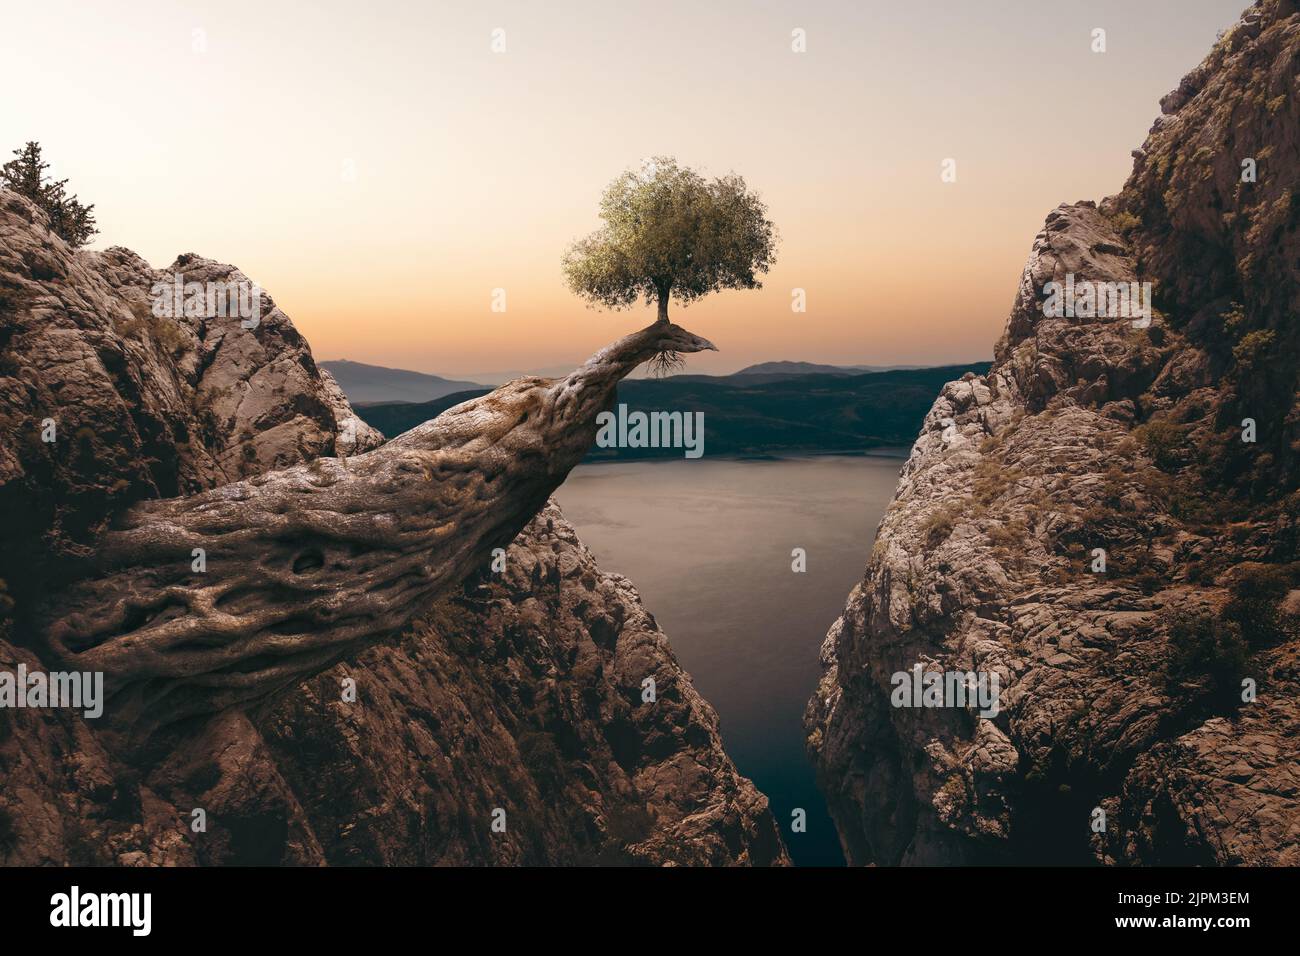 A small tree is growing on a huge log between mountains. Unrealistic fantasy and miracles of the nature concept. Stock Photo